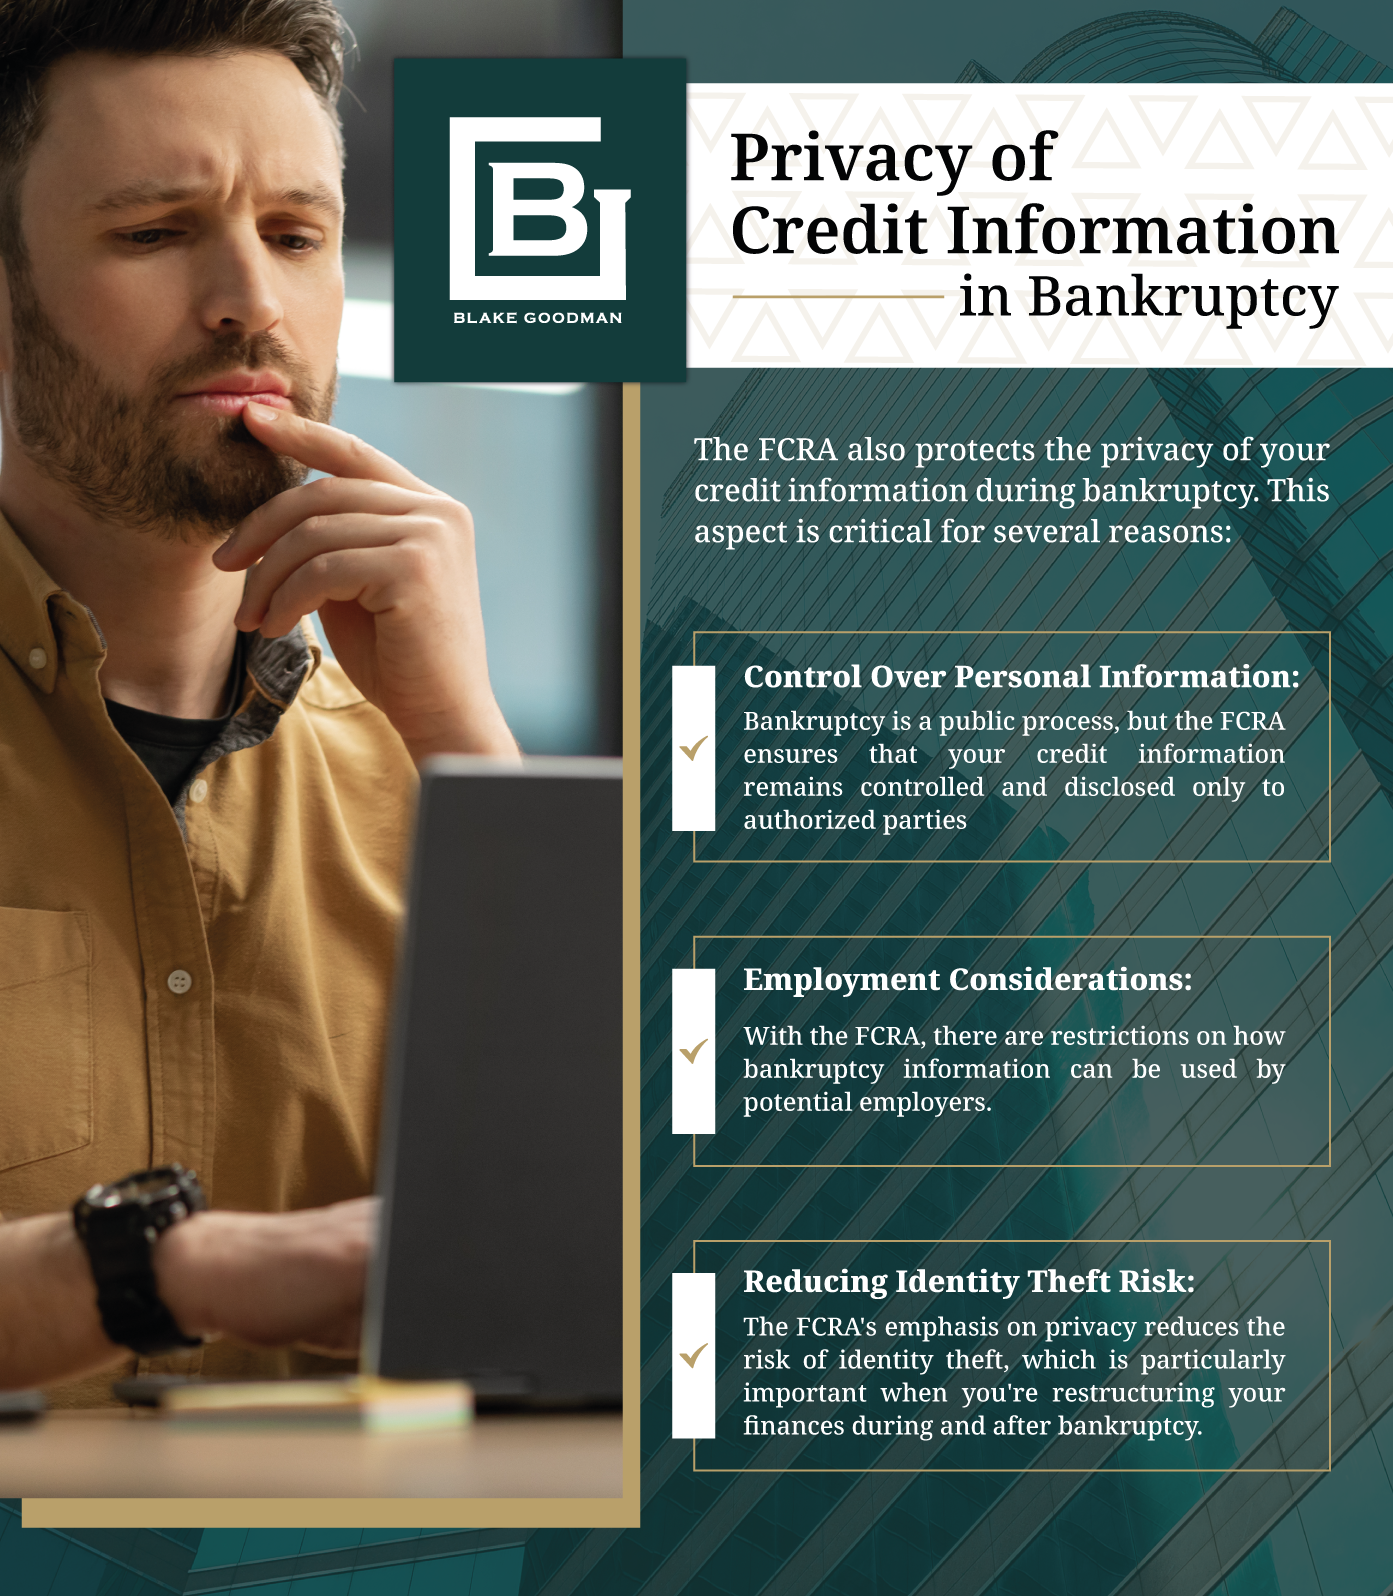 An infographic that explains about the privacy of credit information in bankruptcy